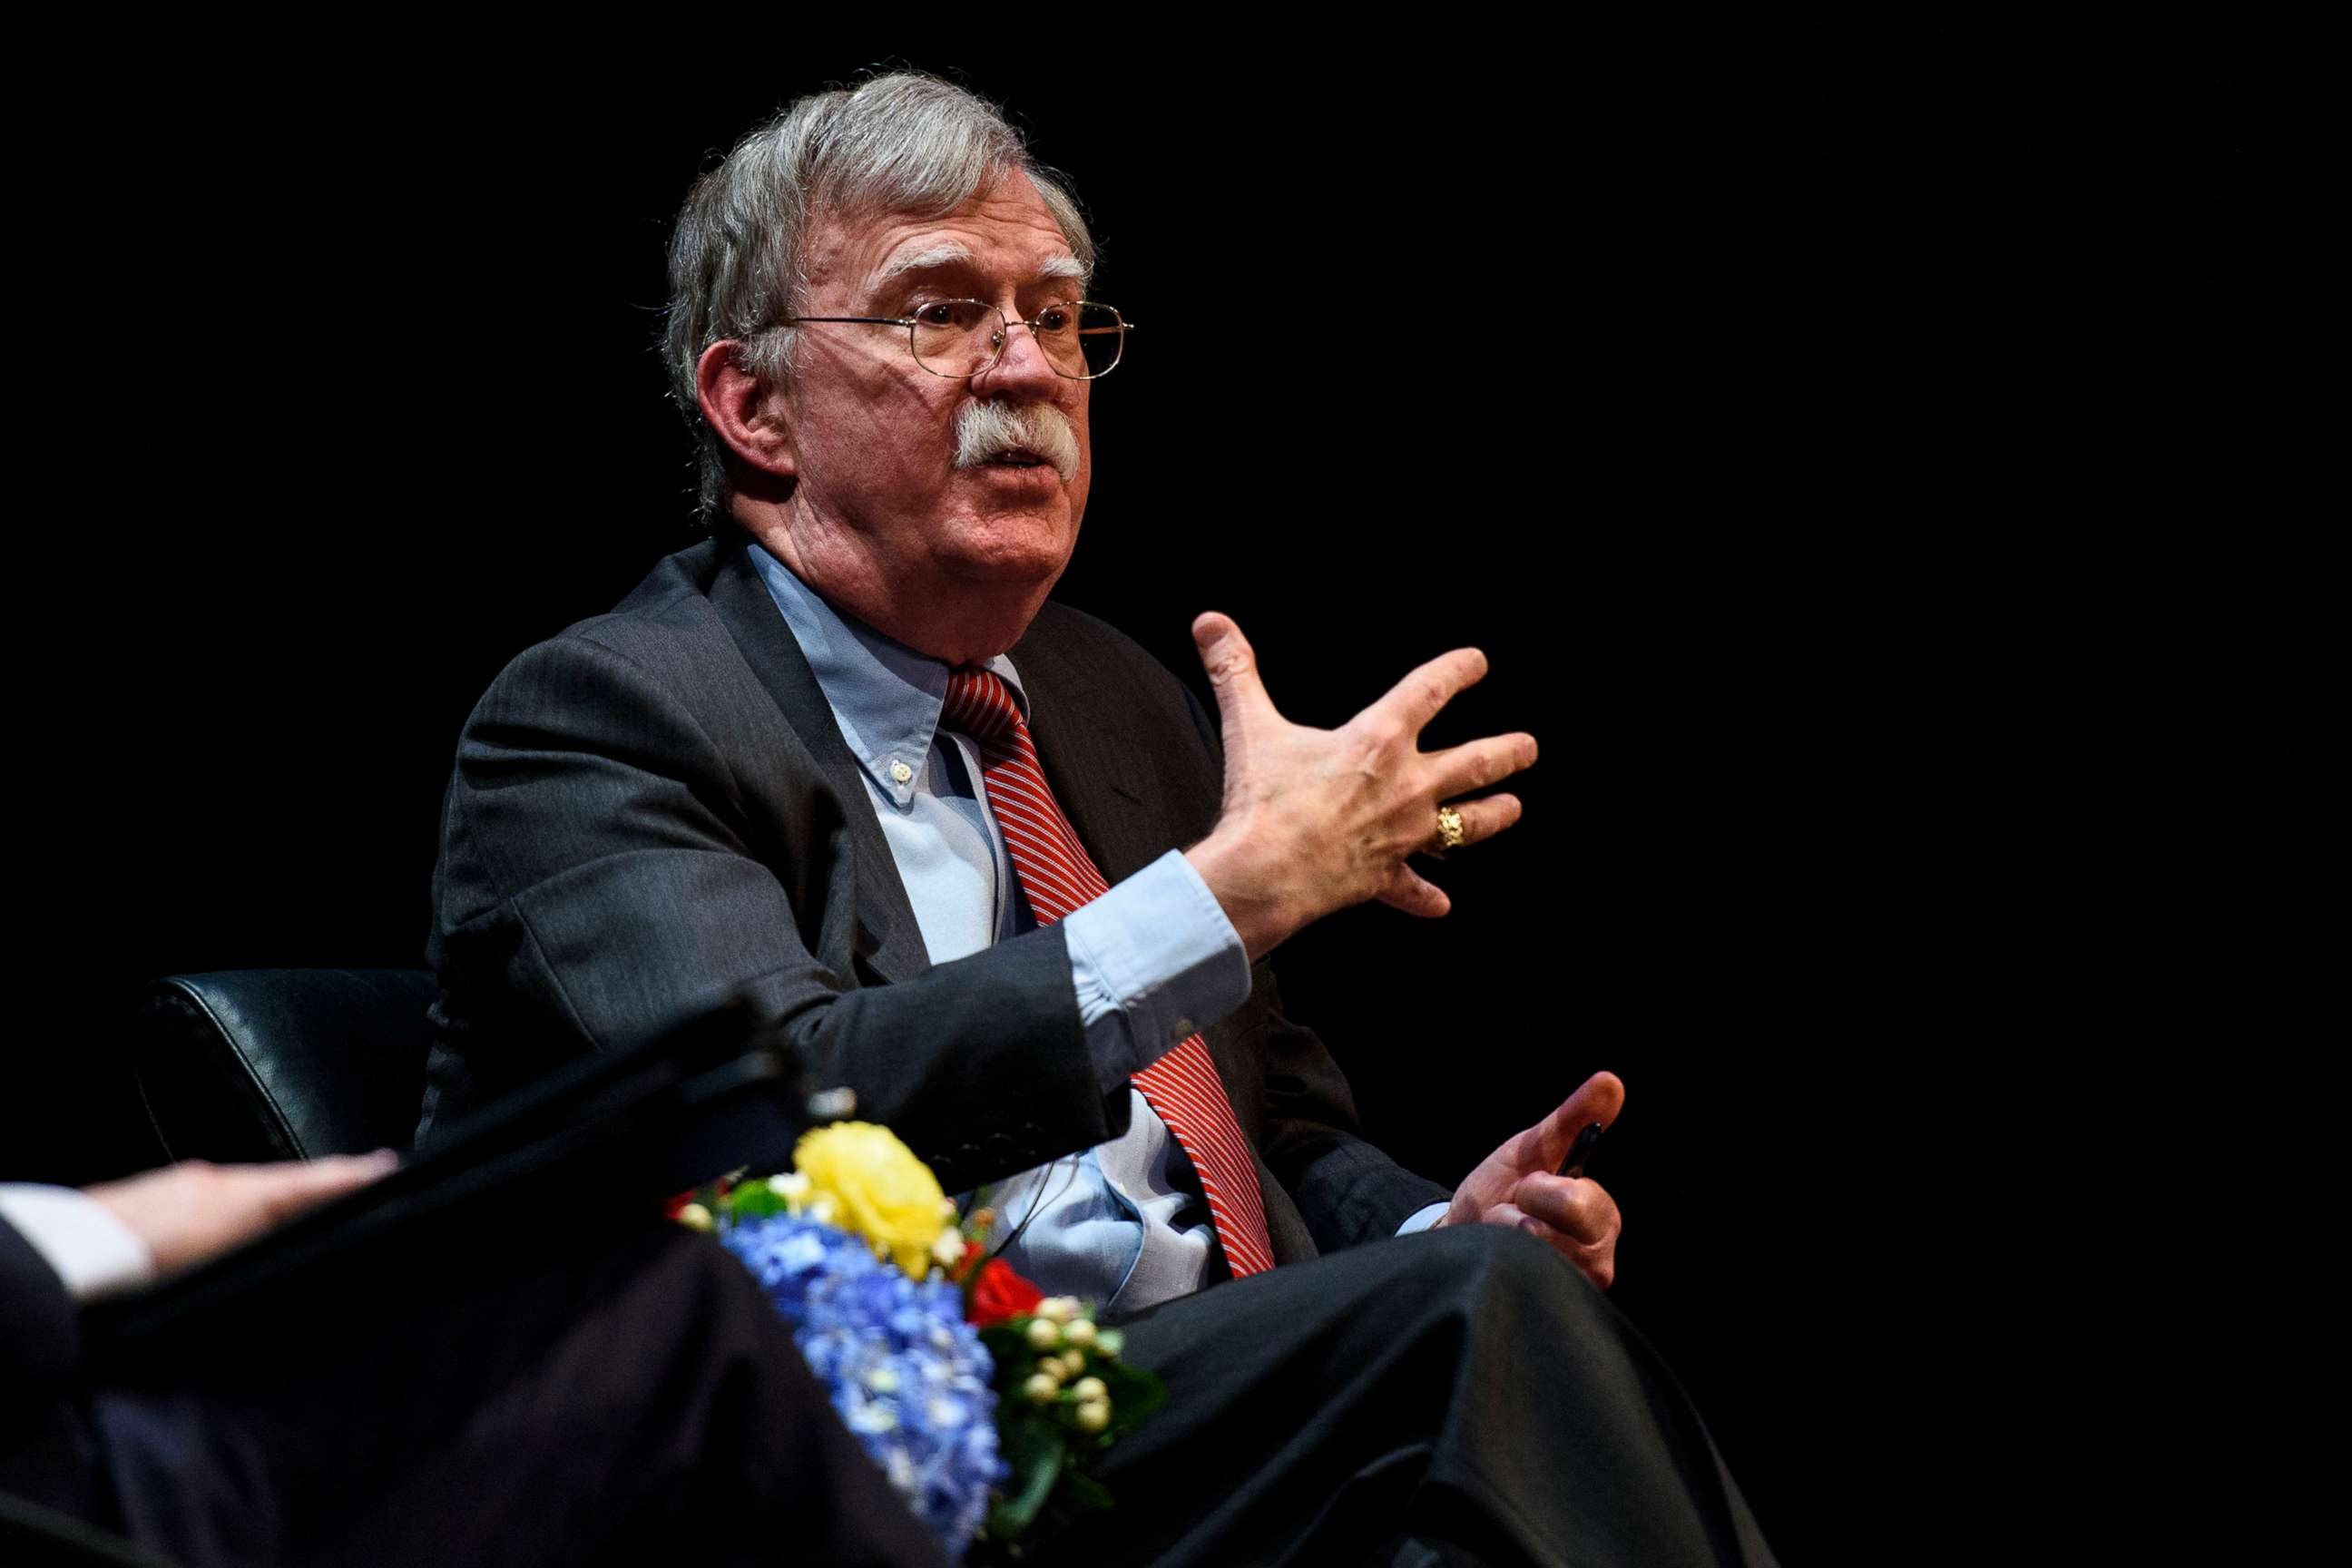 PHOTO: Former National Security Advisor John Bolton discusses the "current threats to national security" during a forum in Durham, N.C., Feb. 17, 2020.